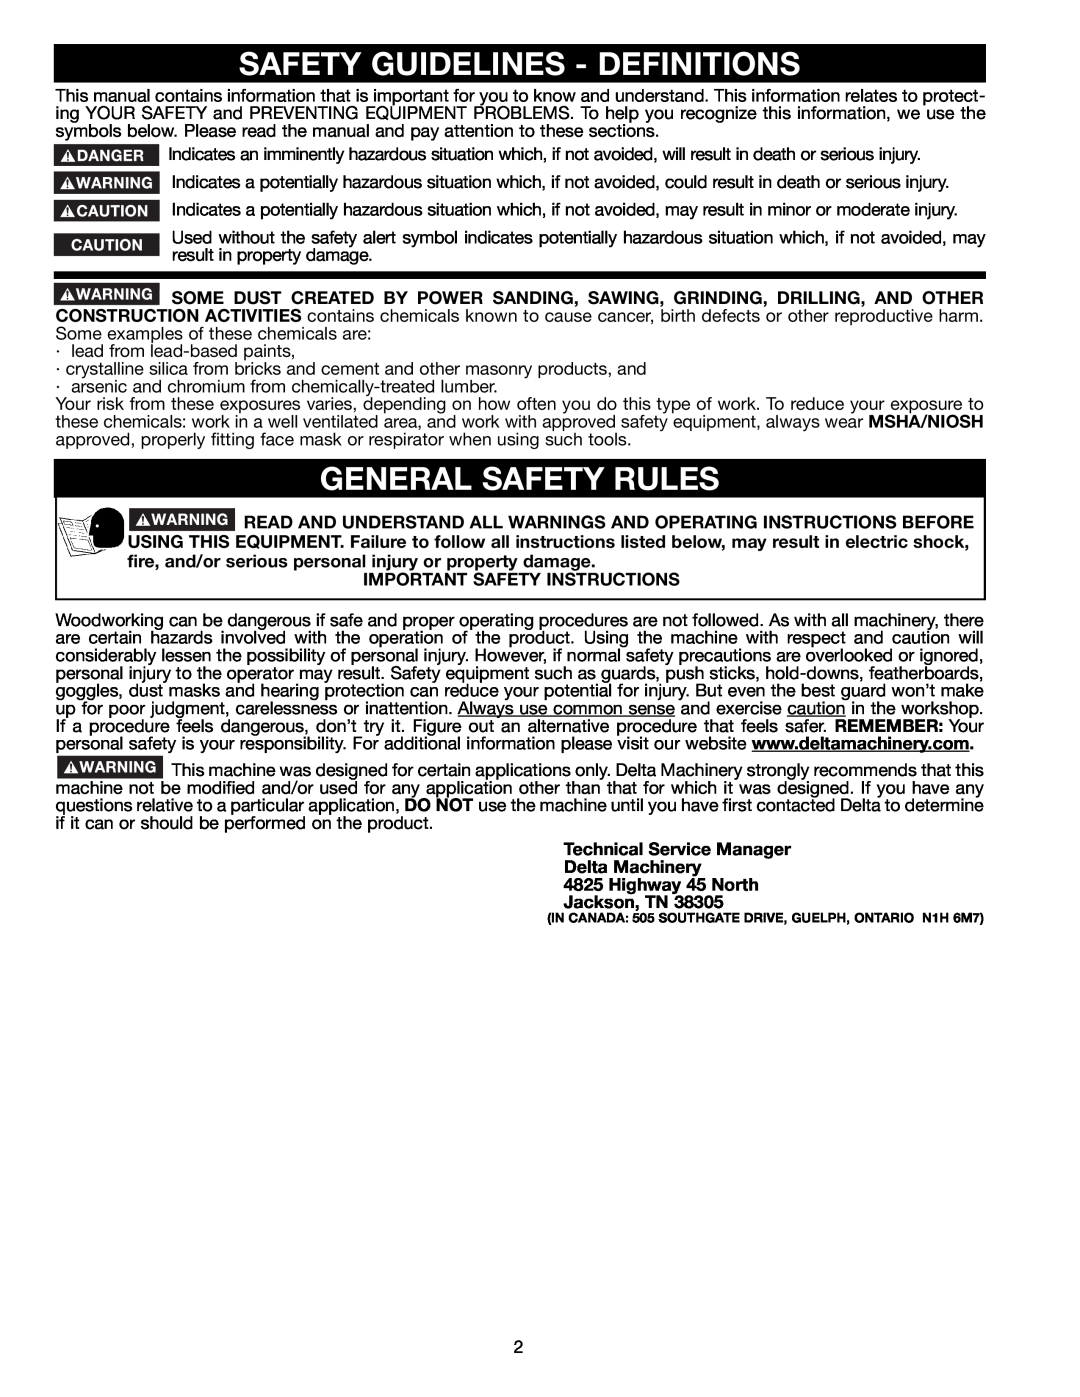 Delta 36-465 Safety Guidelines - Definitions, General Safety Rules, Important Safety Instructions, Jackson, TN 